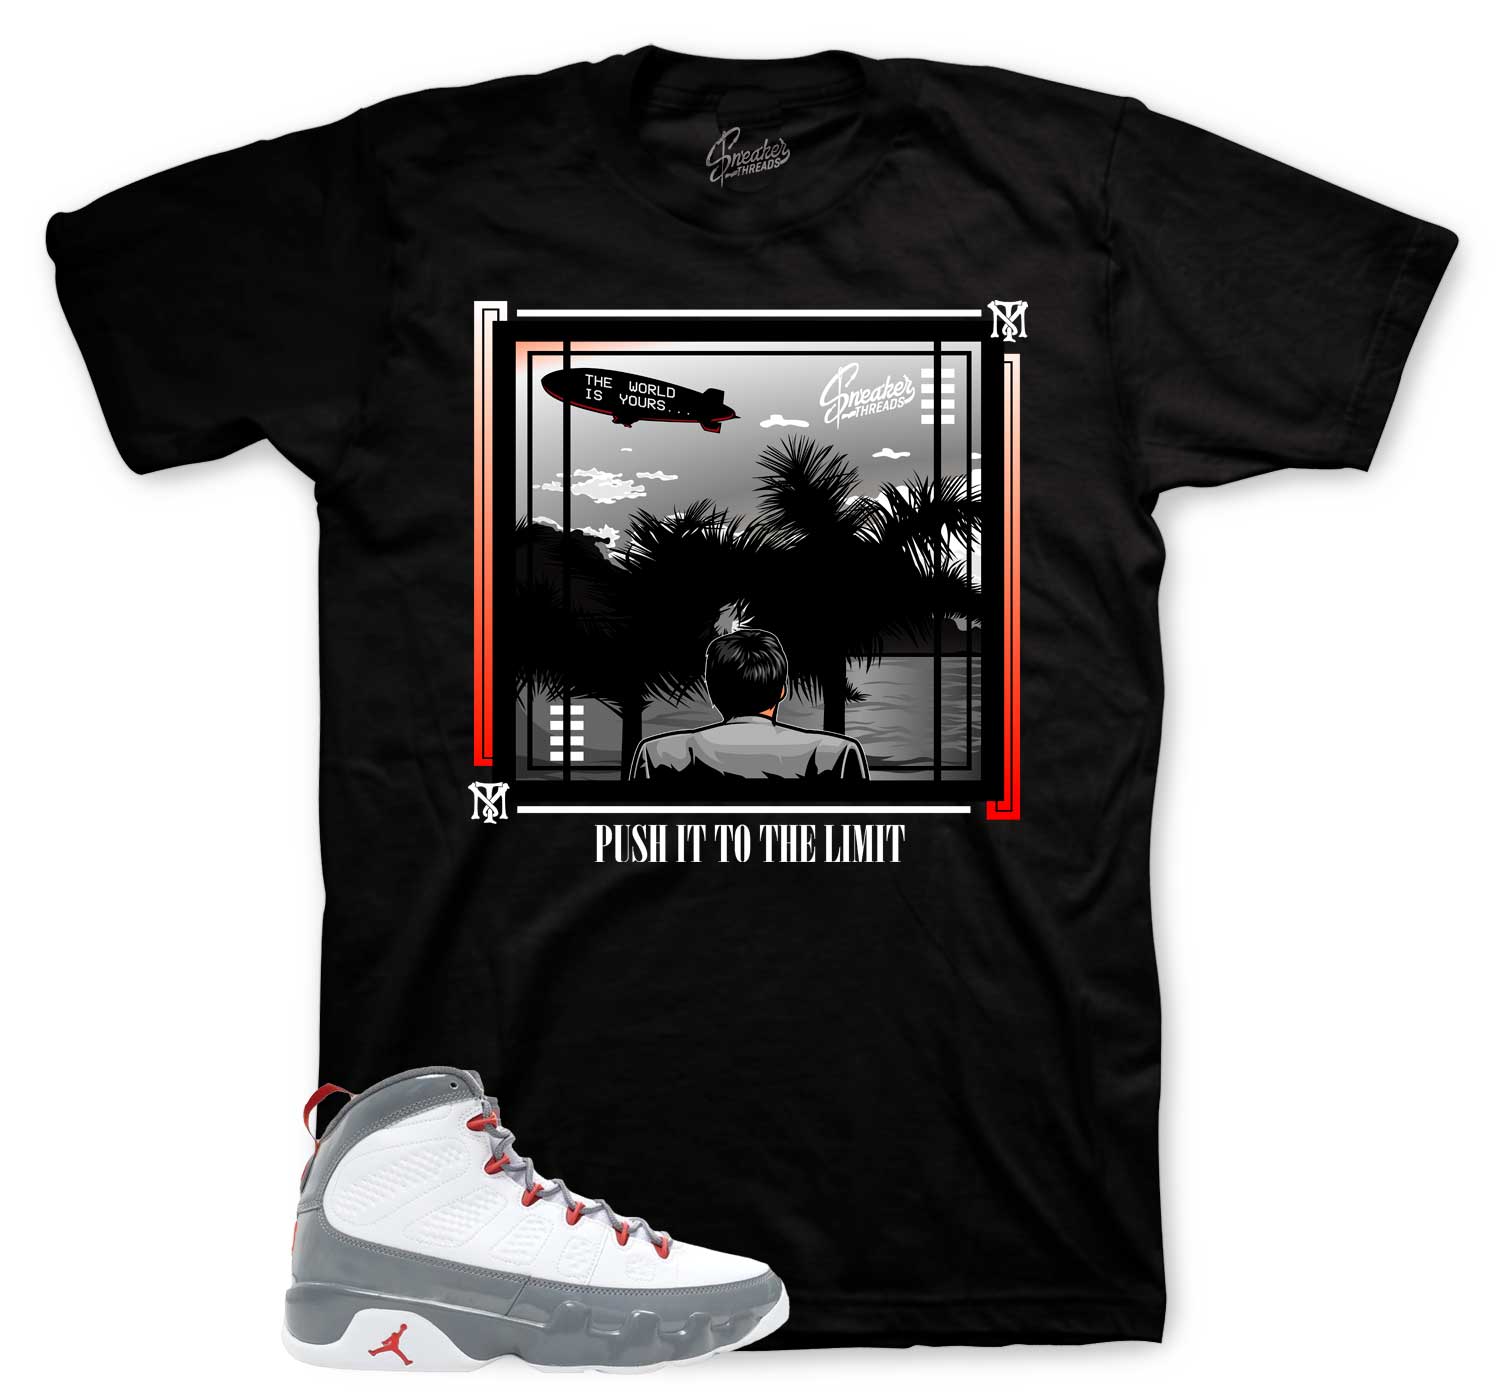 Retro 9 Fire Red Shirt - World Is Yours - Black